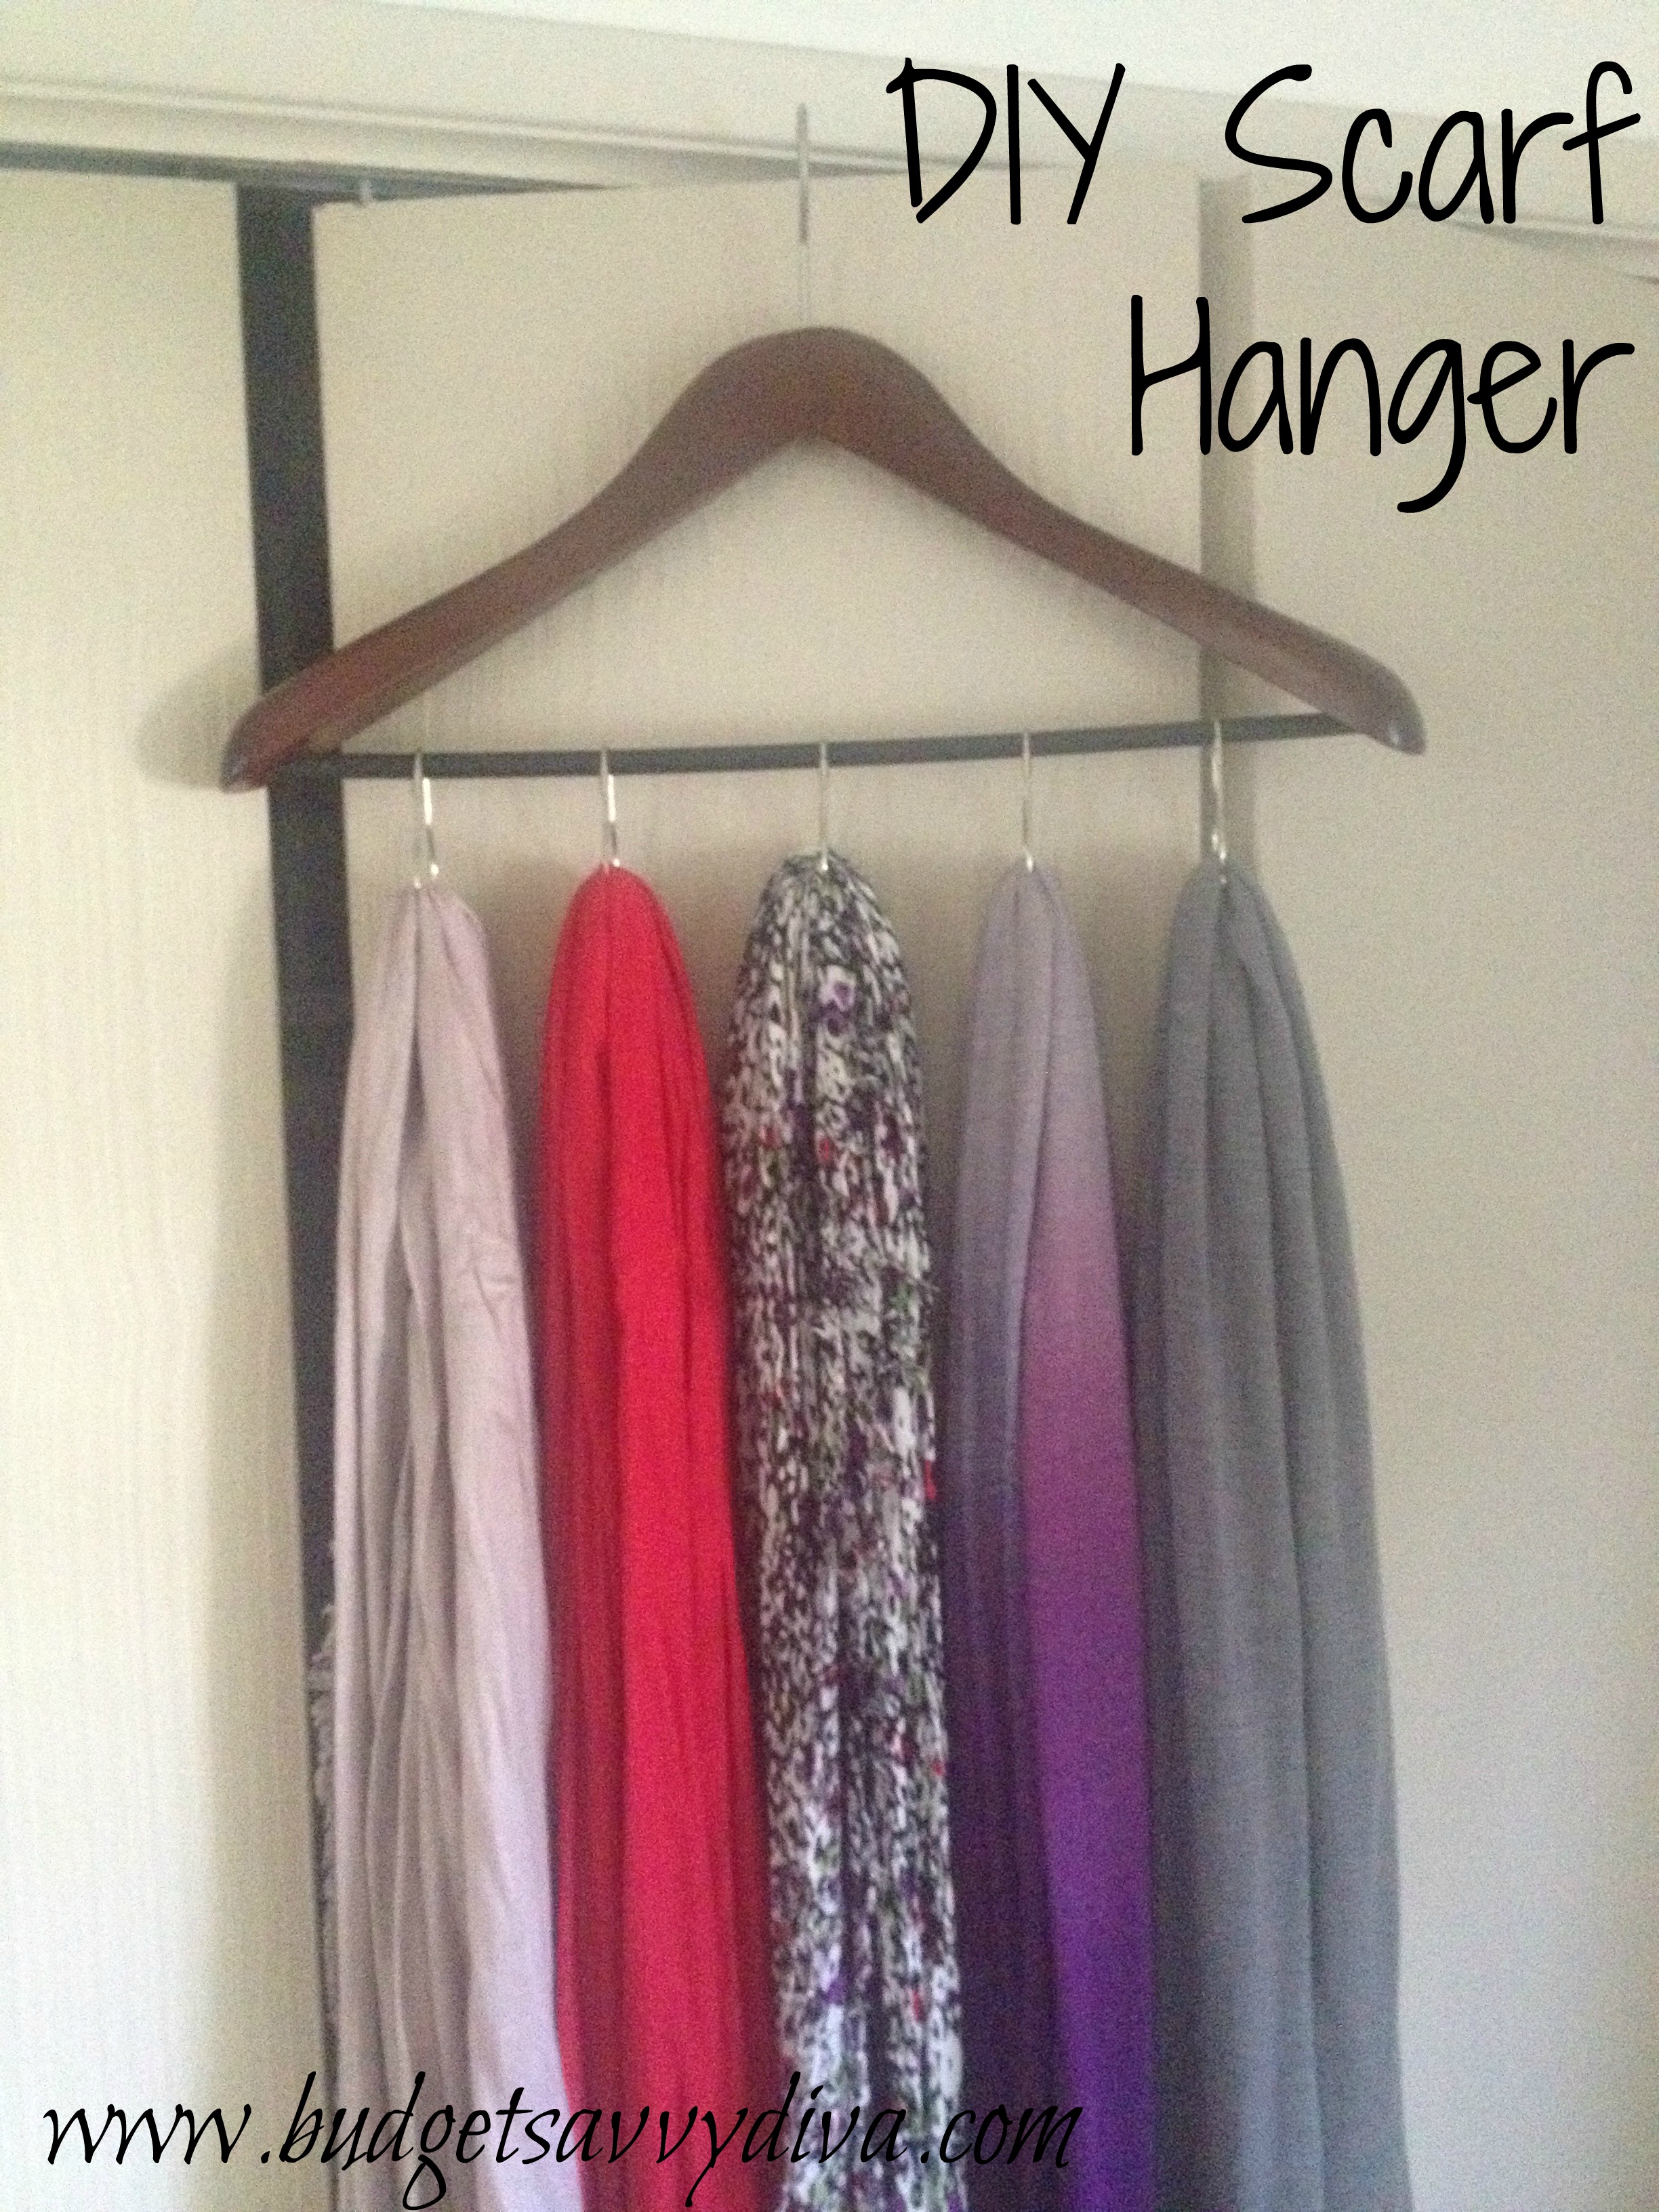 Scarf Hanger Using Shower Curtain Rings, Scarf Shower Curtain